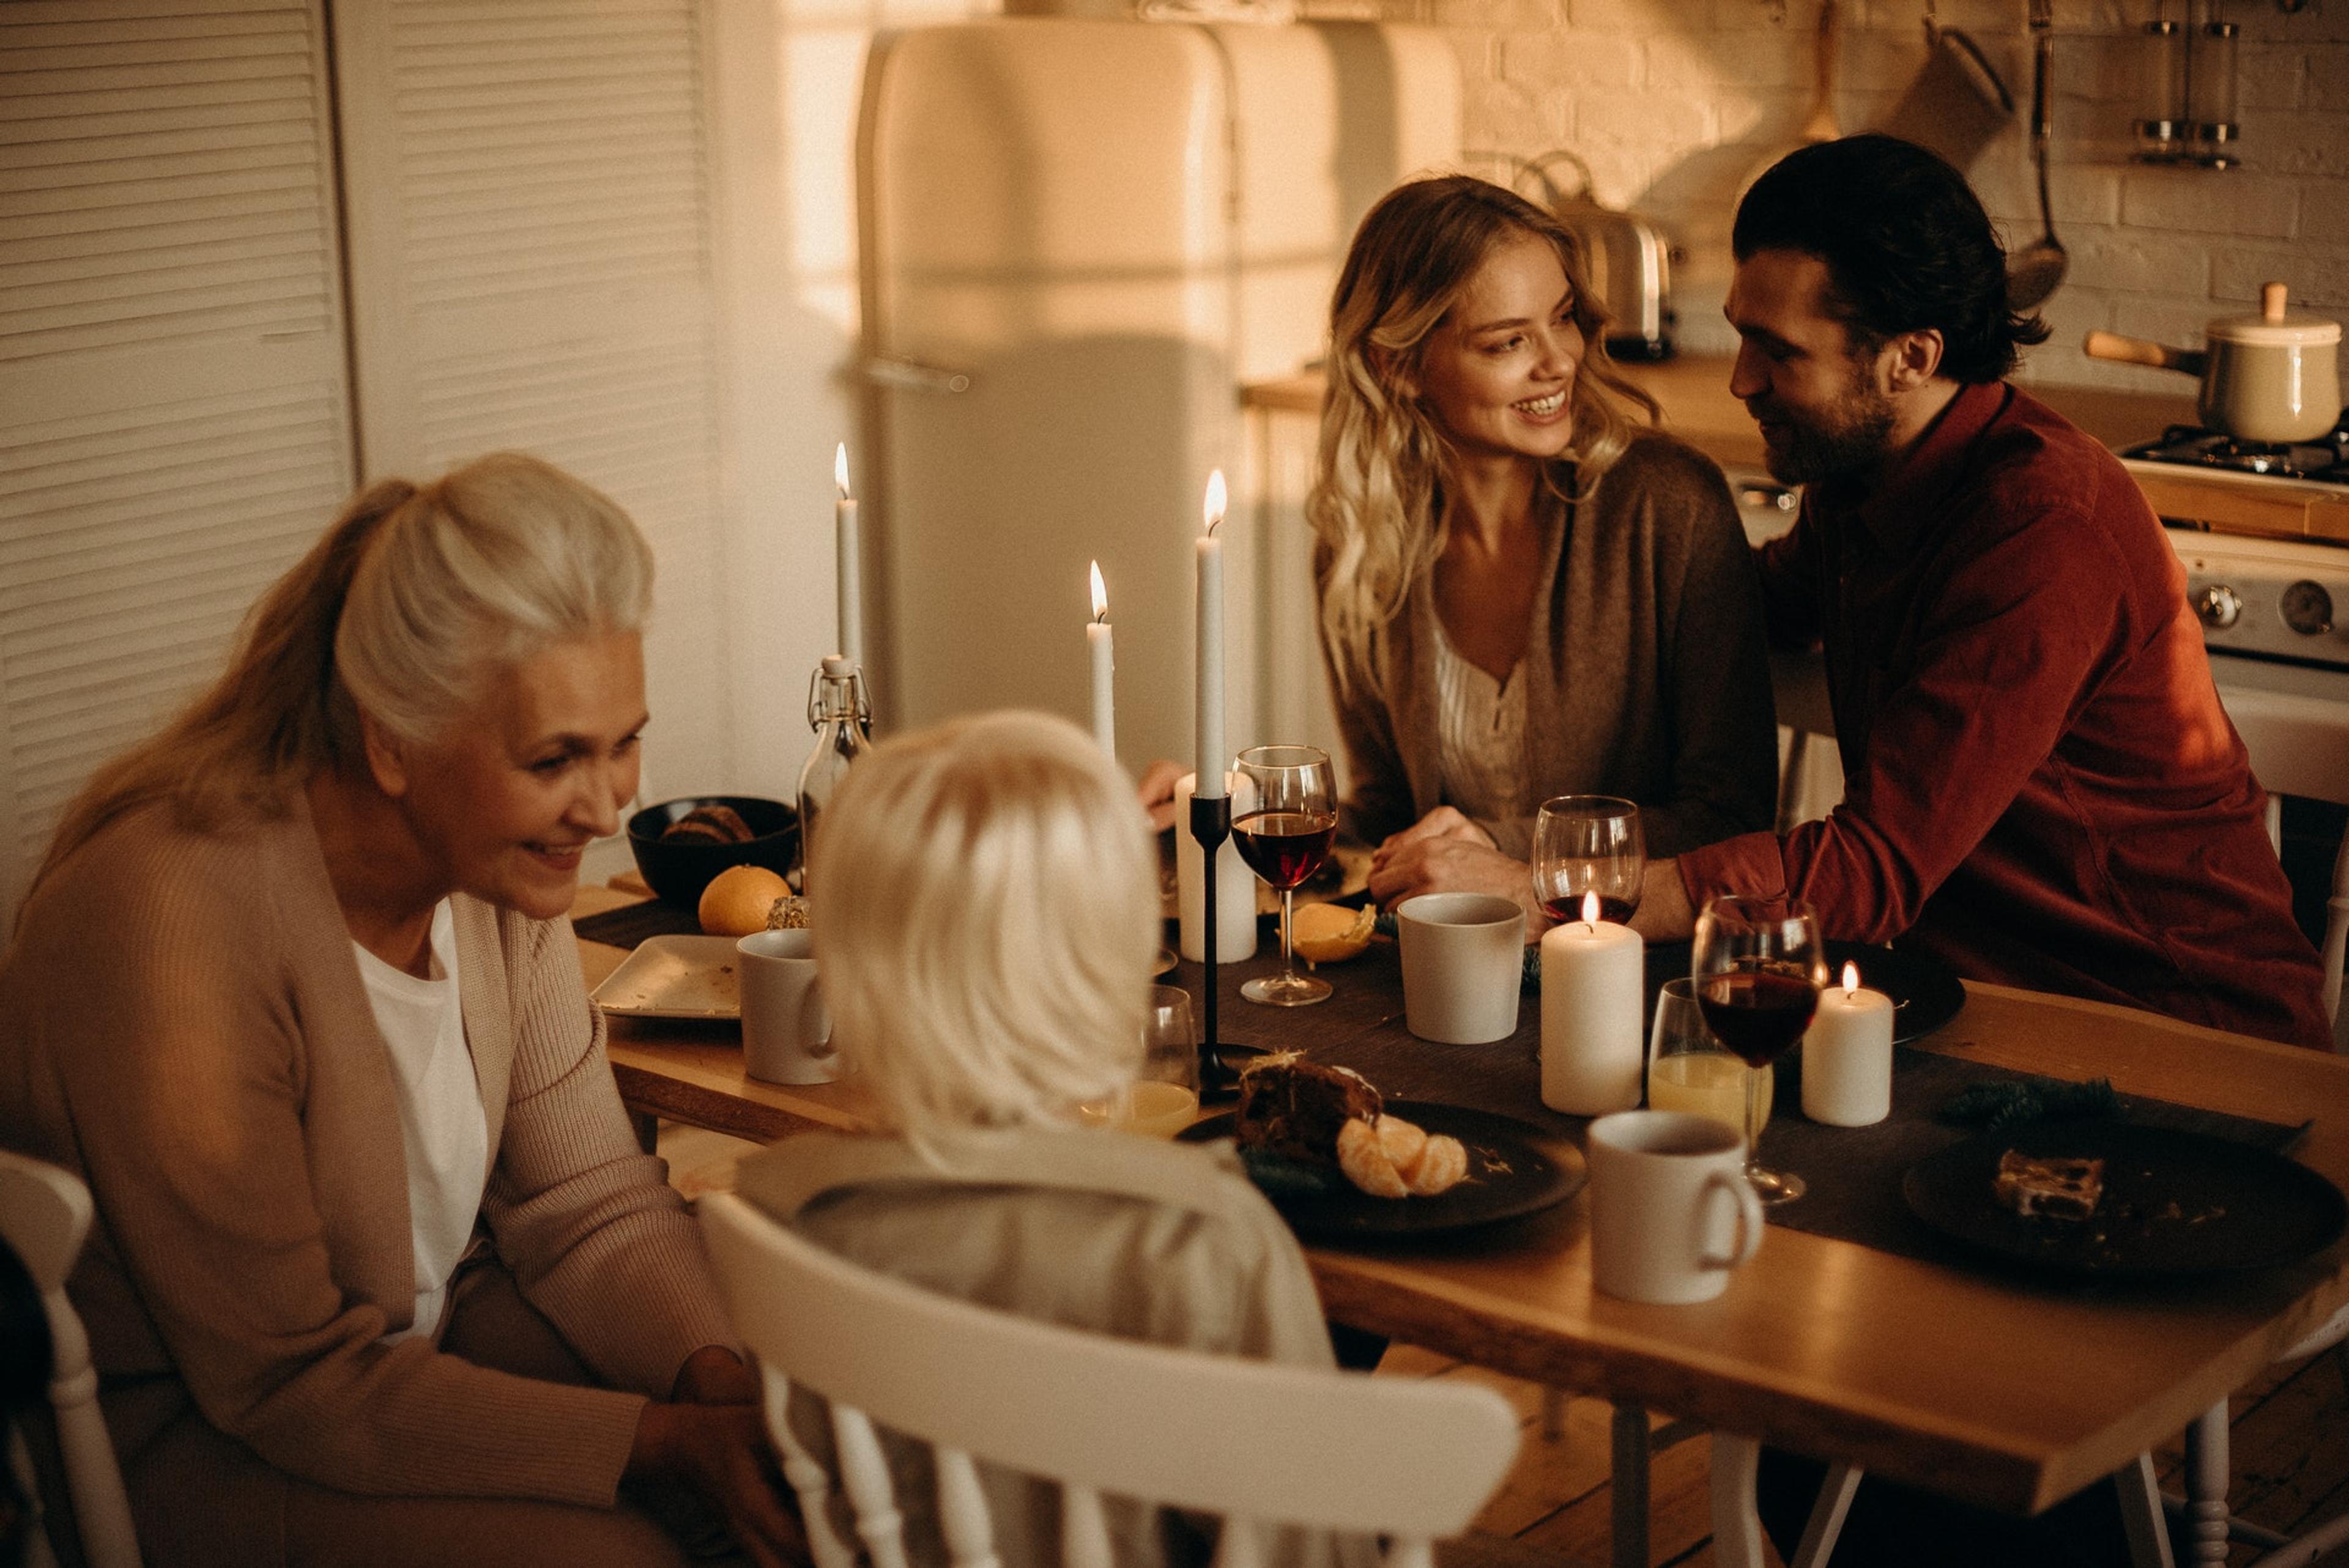 A family gathers around a kitchen table